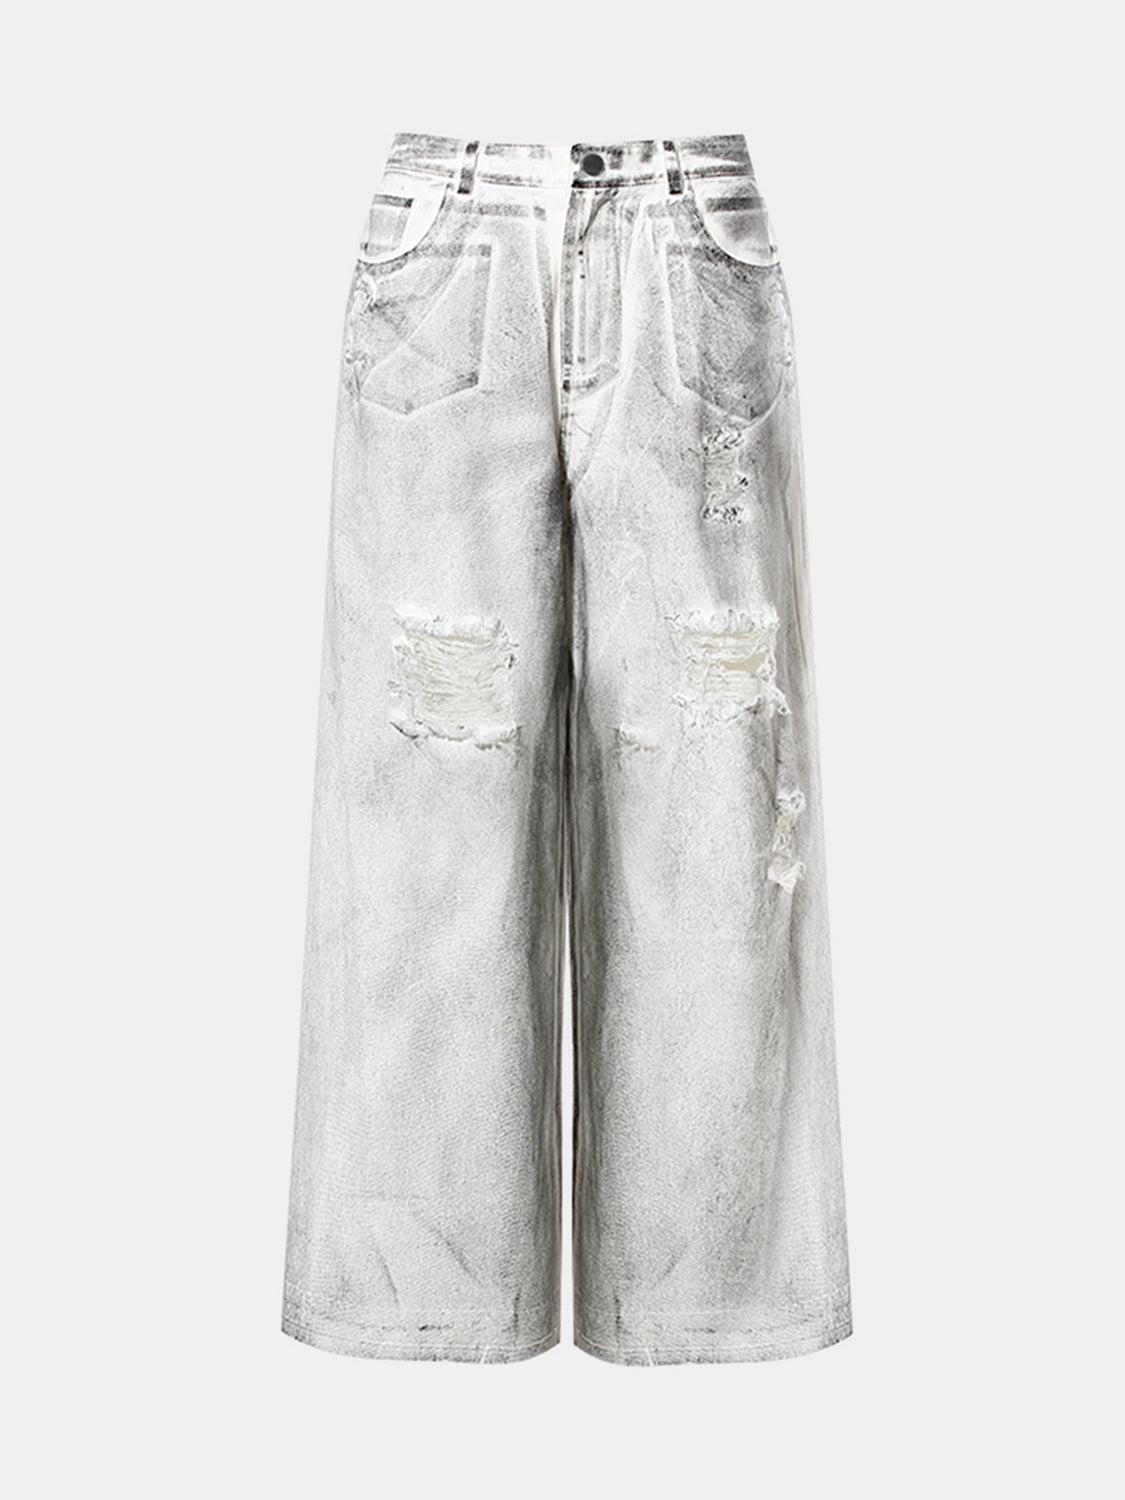 a pair of white jeans with holes on them